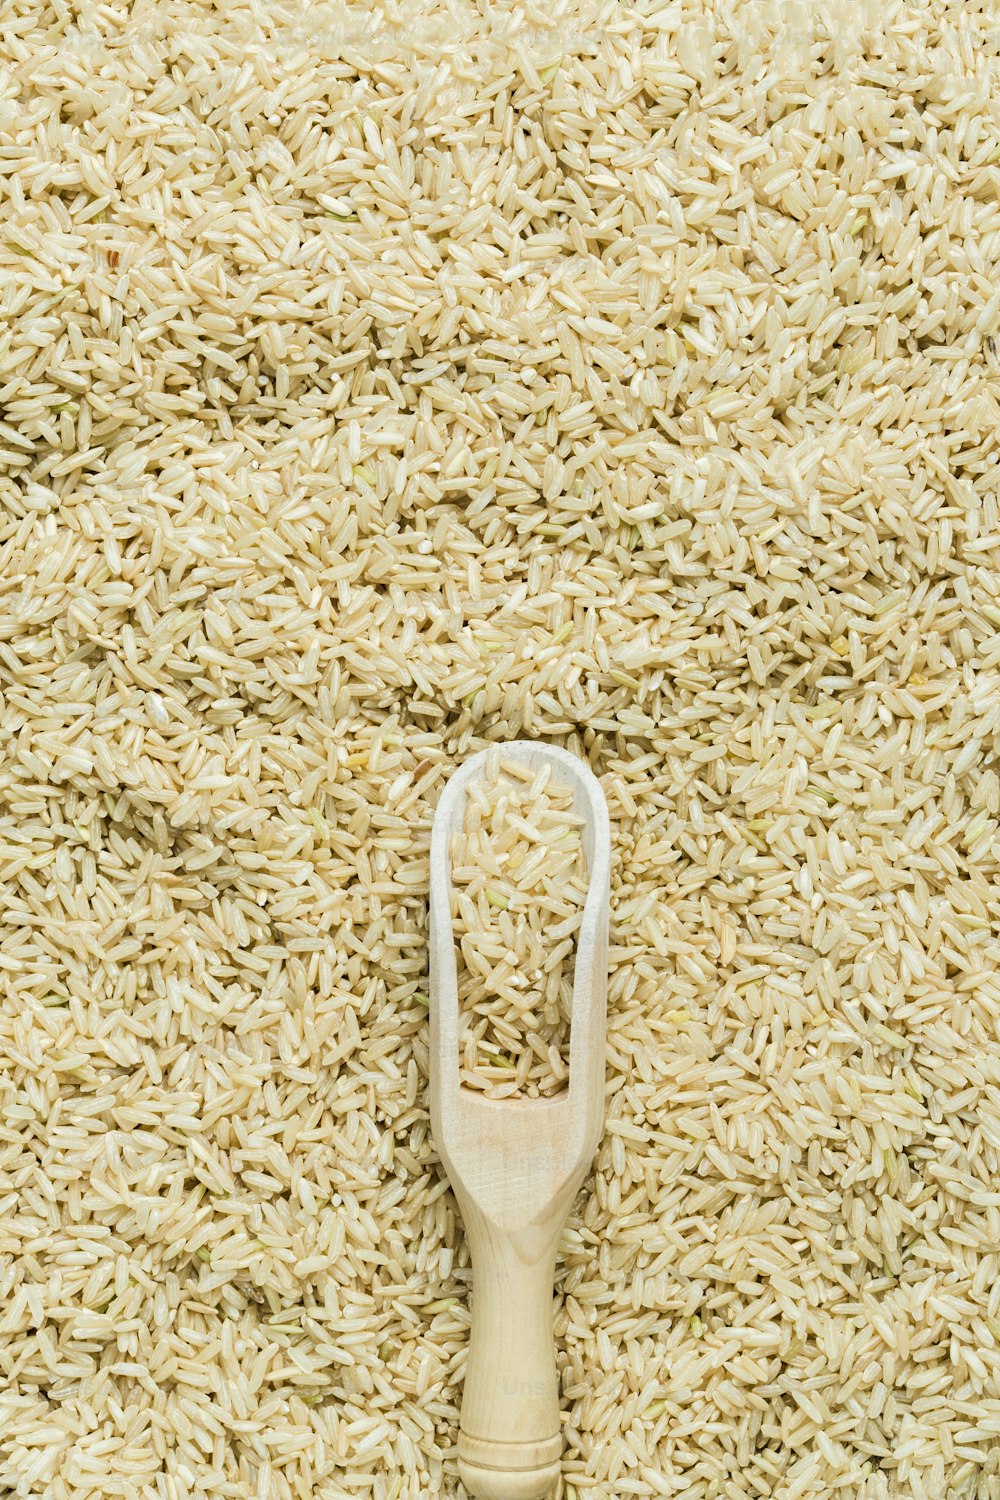 a wooden scoop of rice on top of a pile of rice